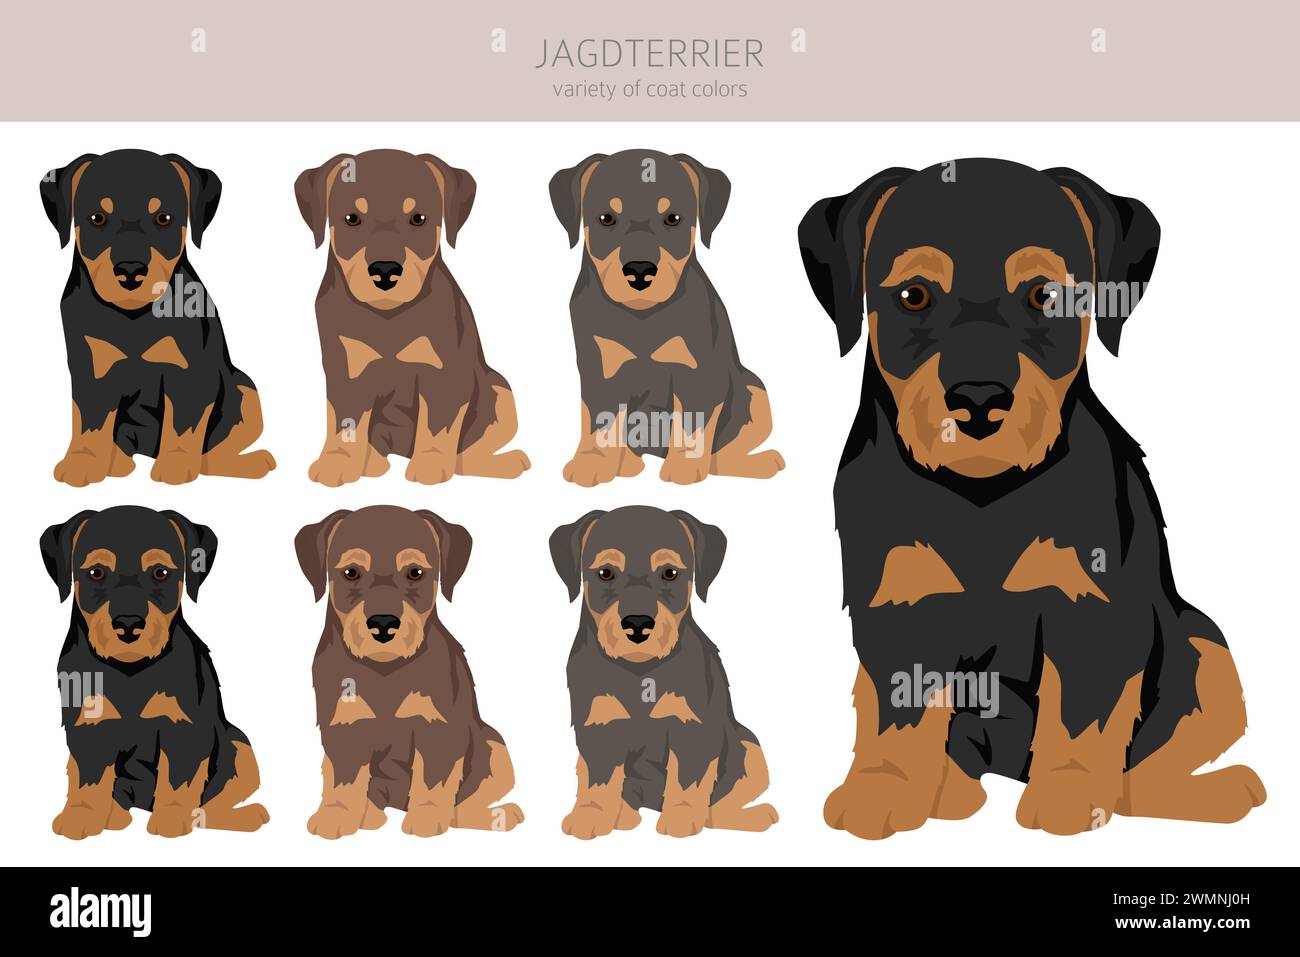 Jagdterrier puppy clipart. Different poses, coat colors set.  Vector illustration Stock Vector